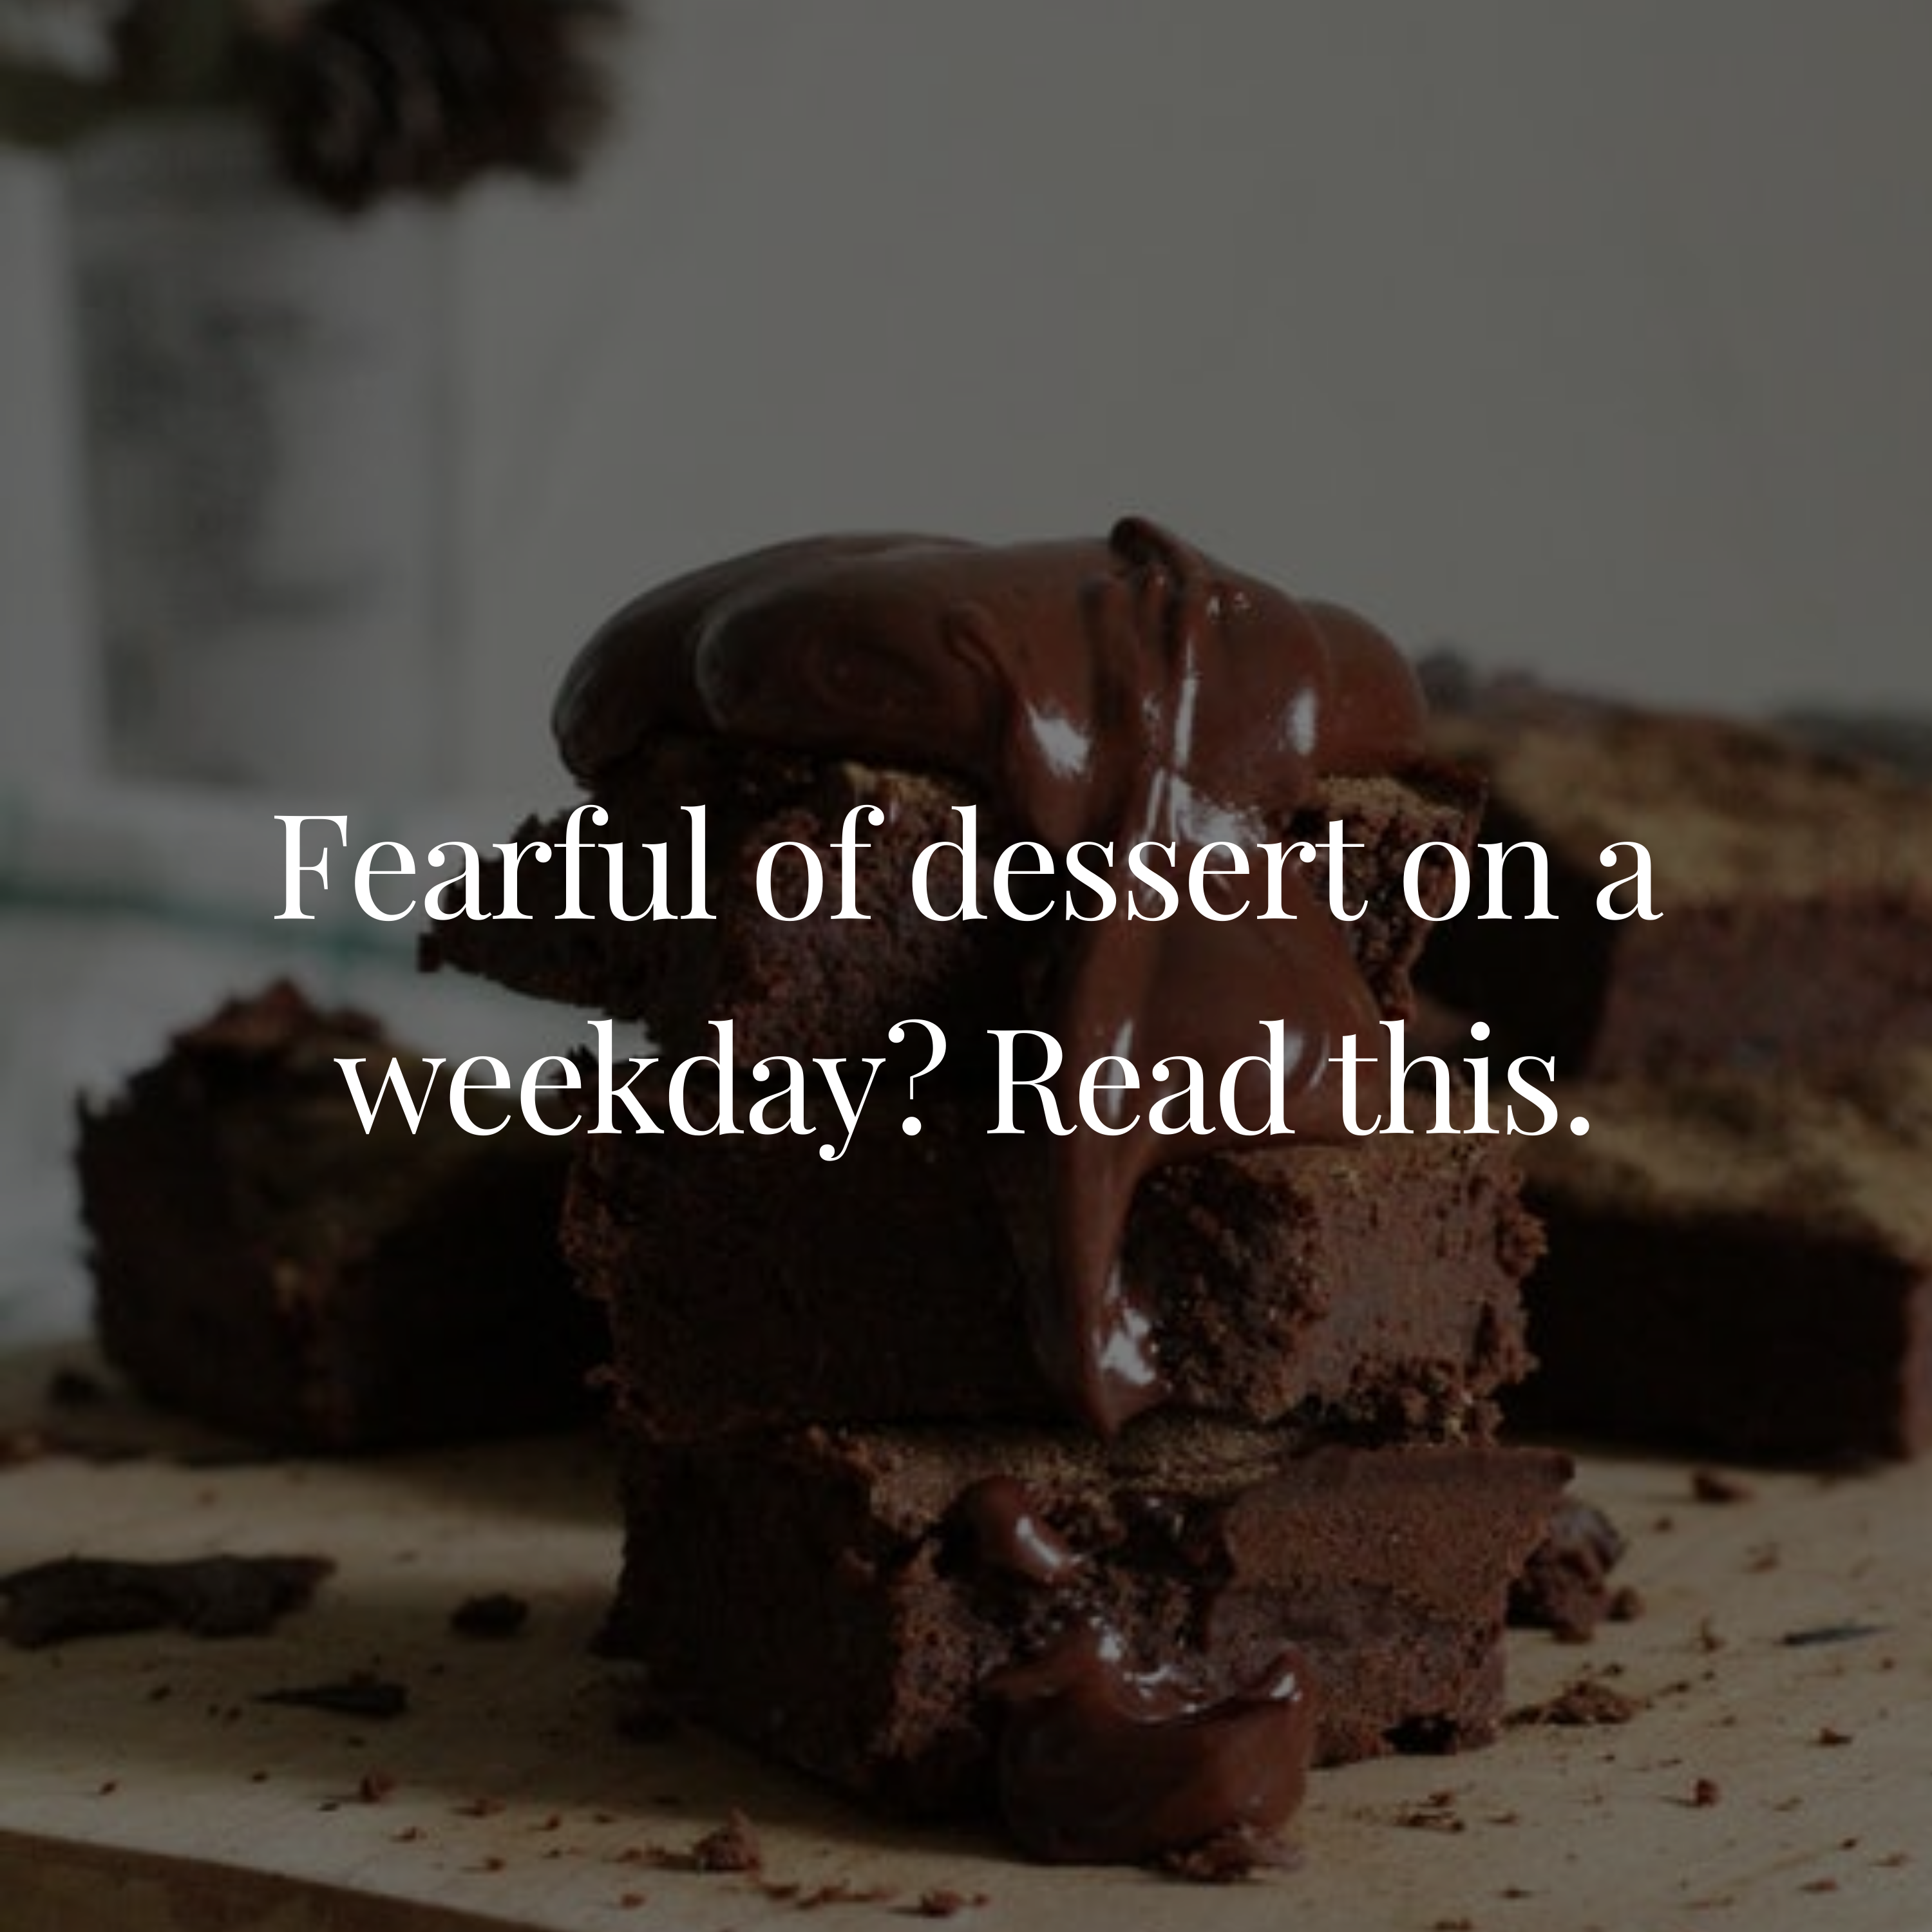 Fearful of dessert on a weekday? Read this